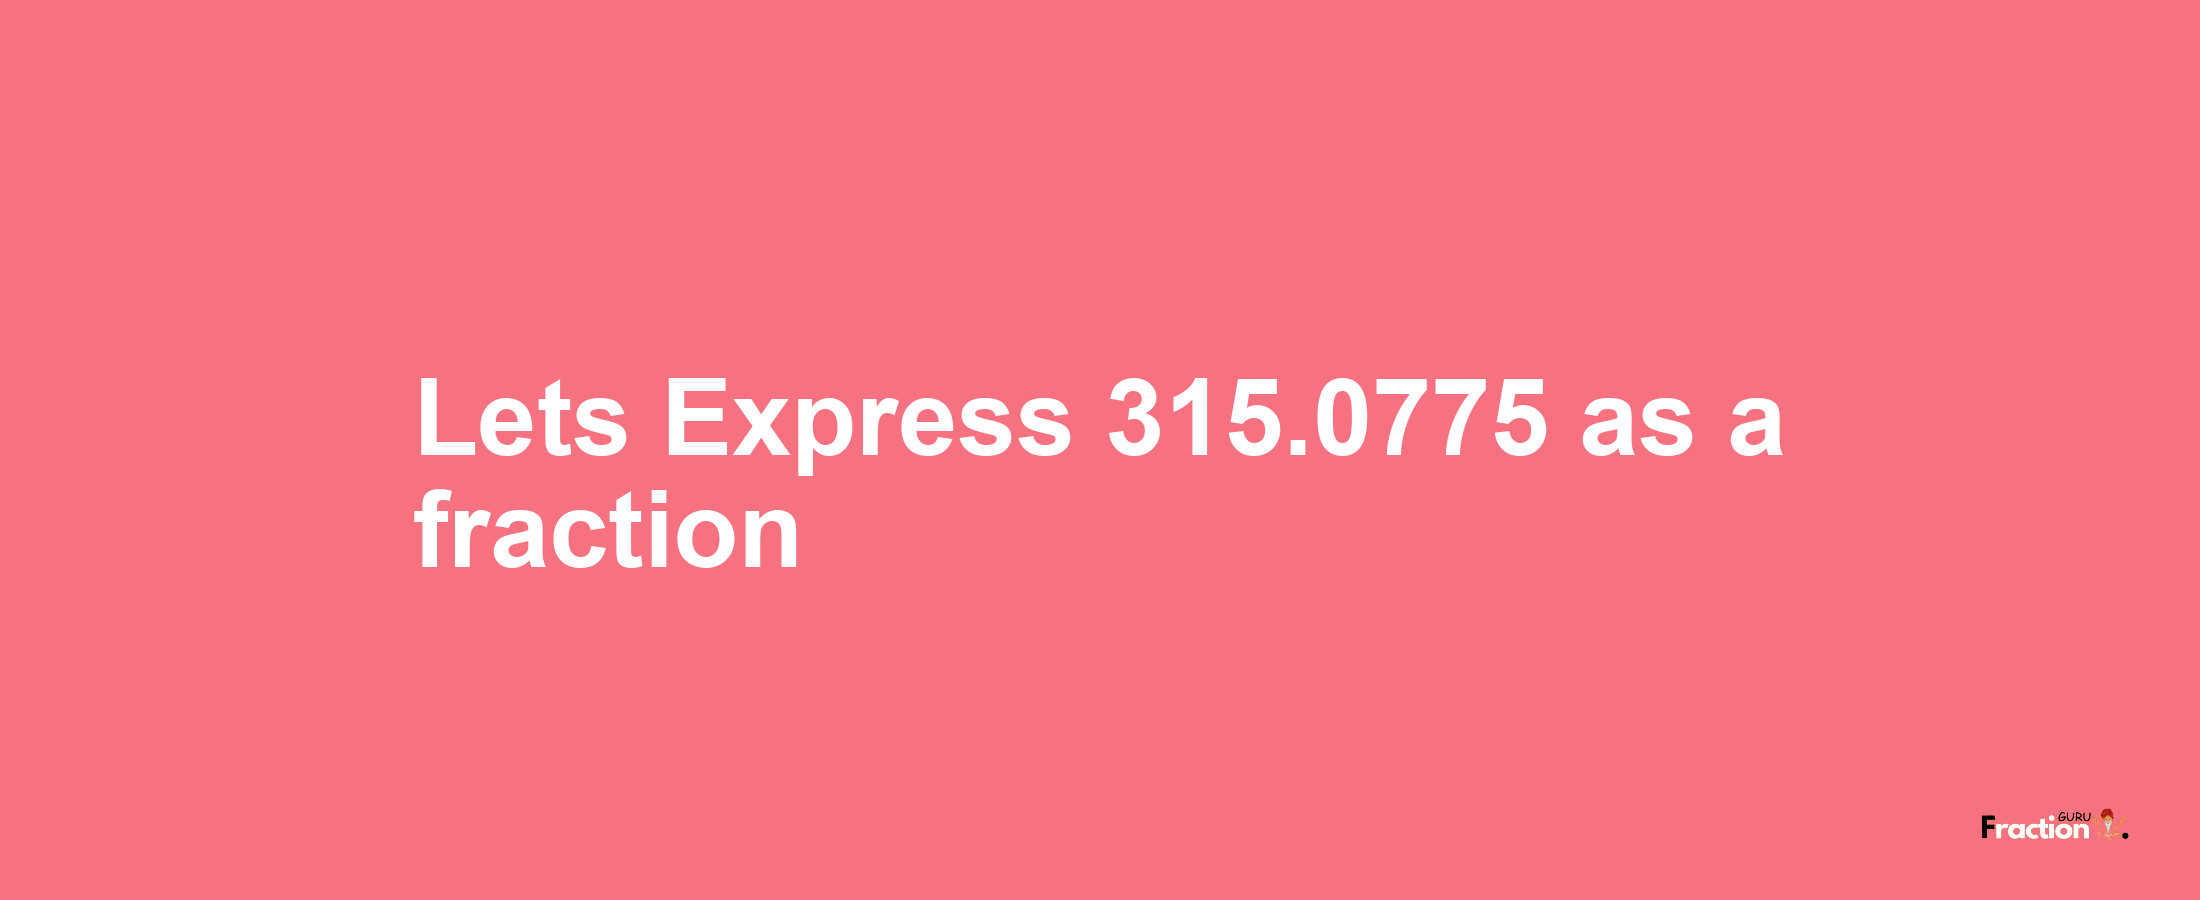 Lets Express 315.0775 as afraction